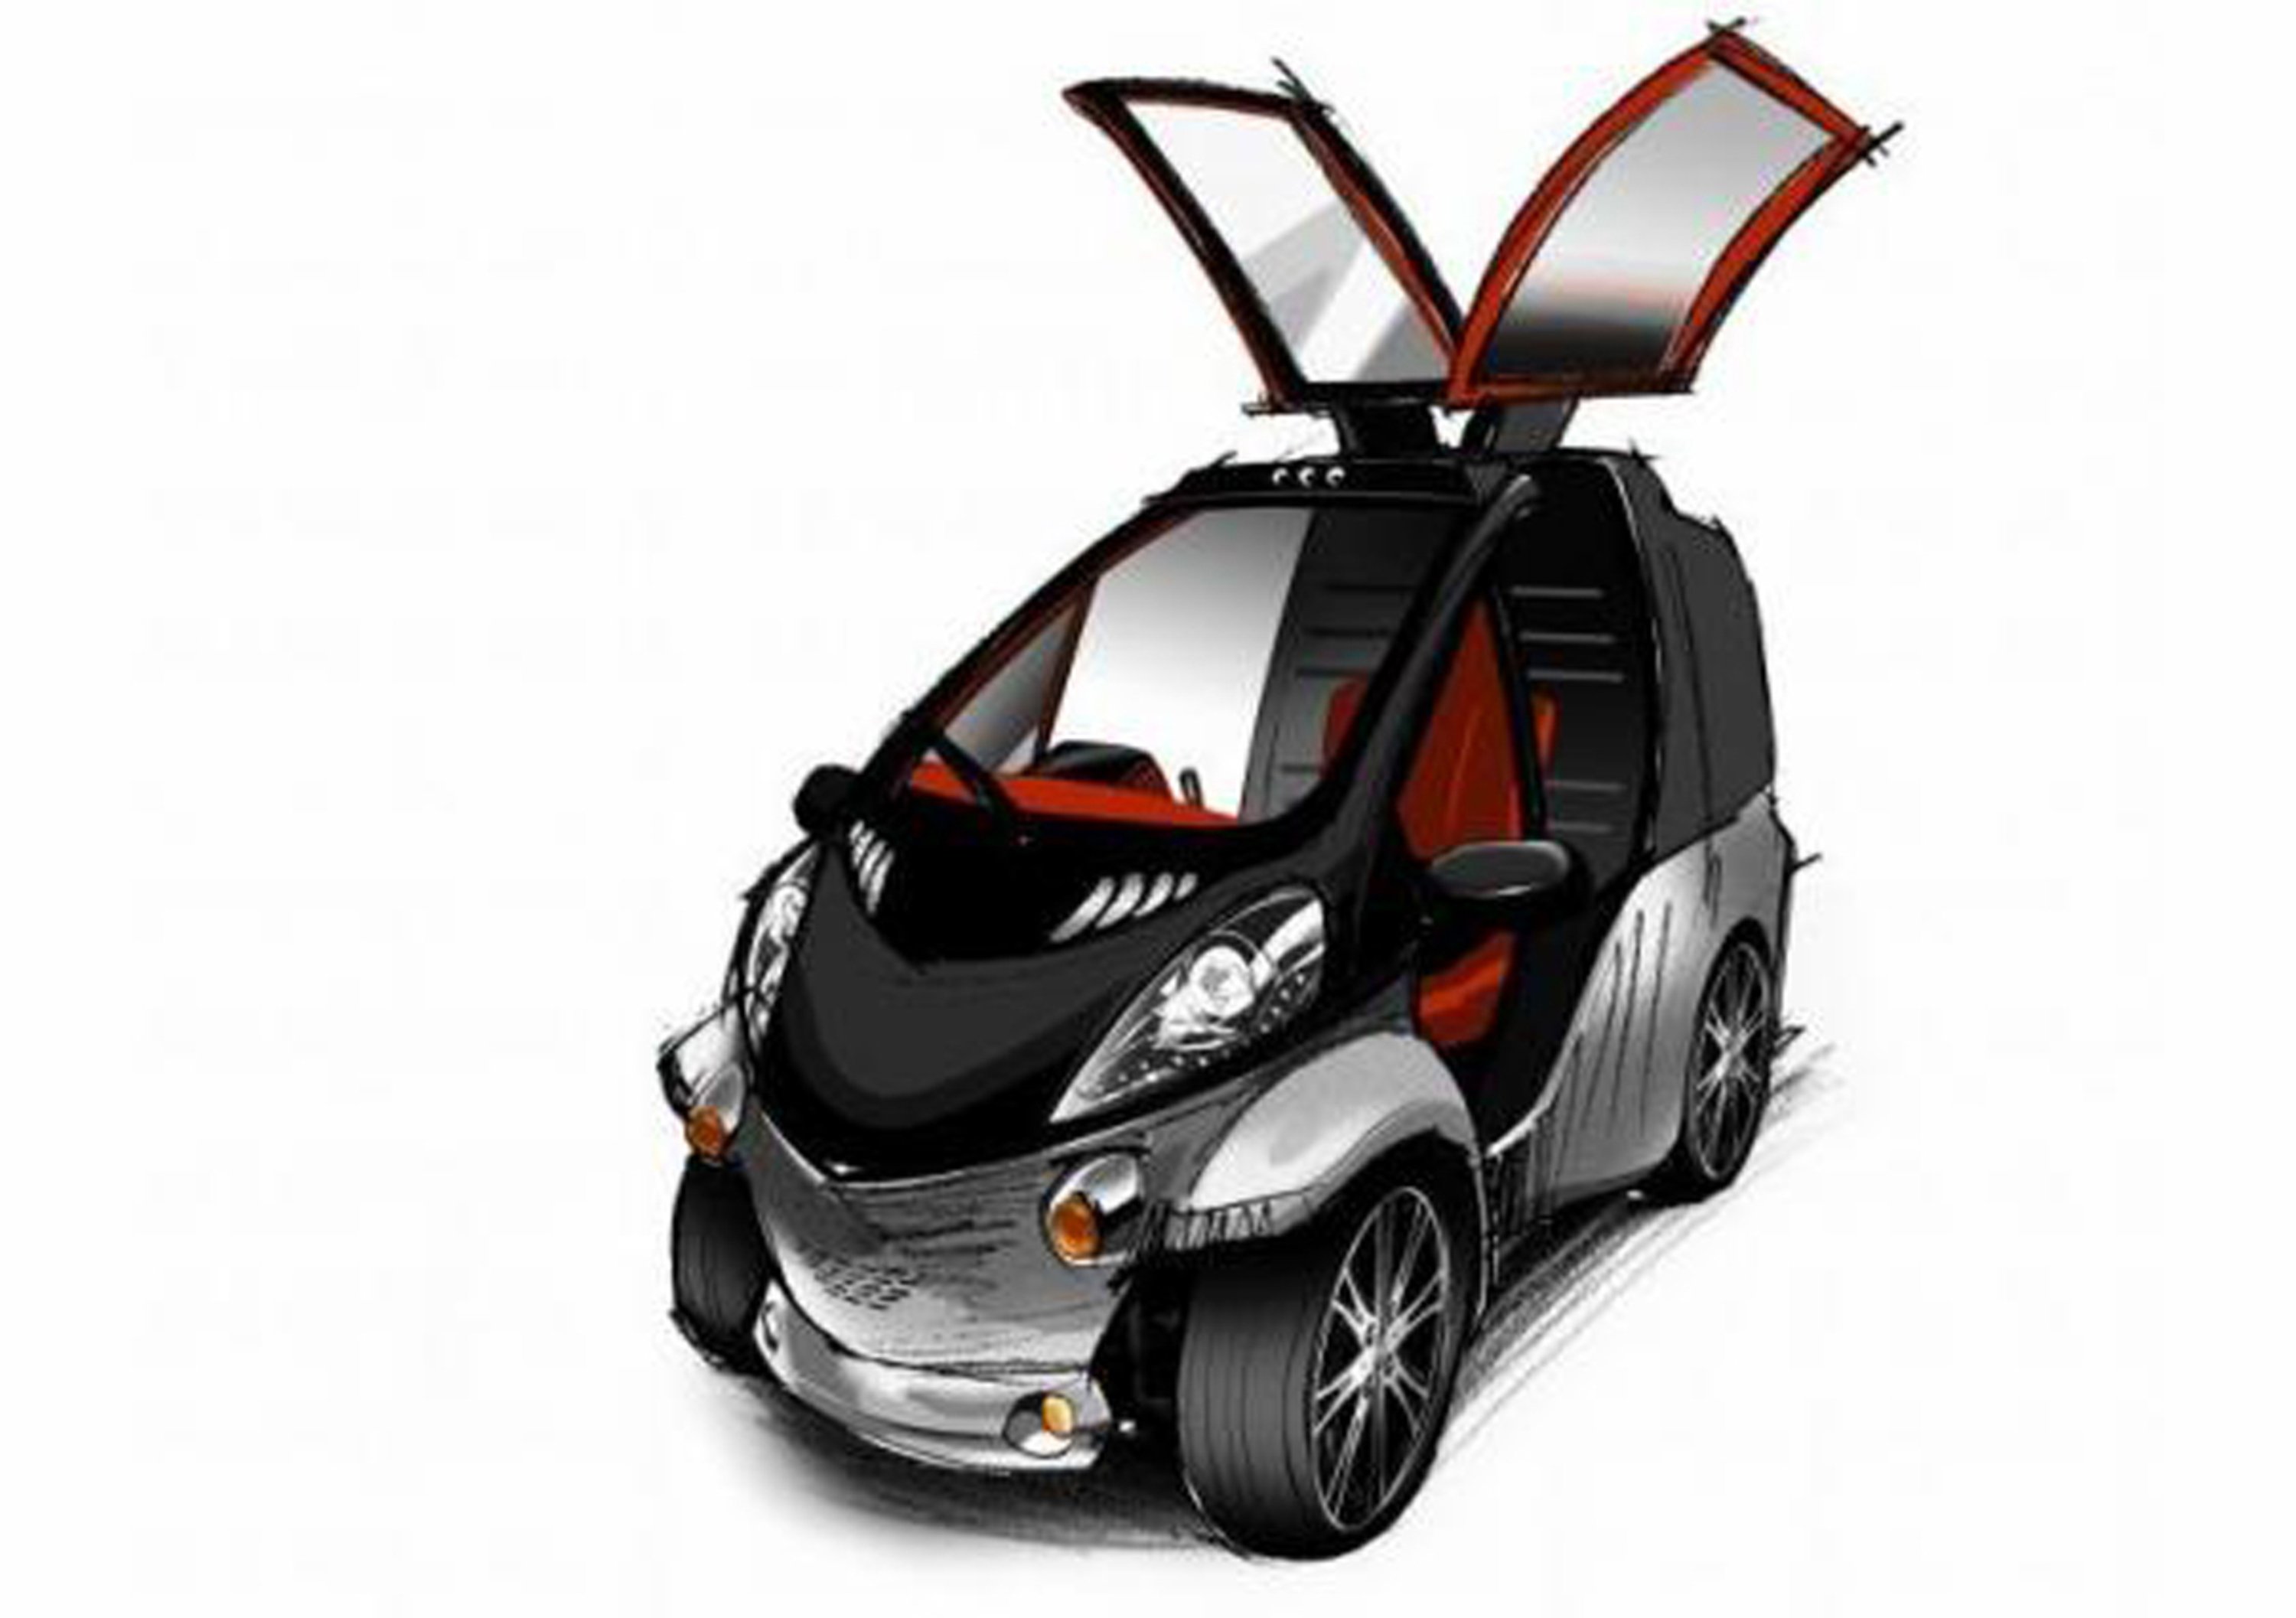 Toyota Smart Insect concept